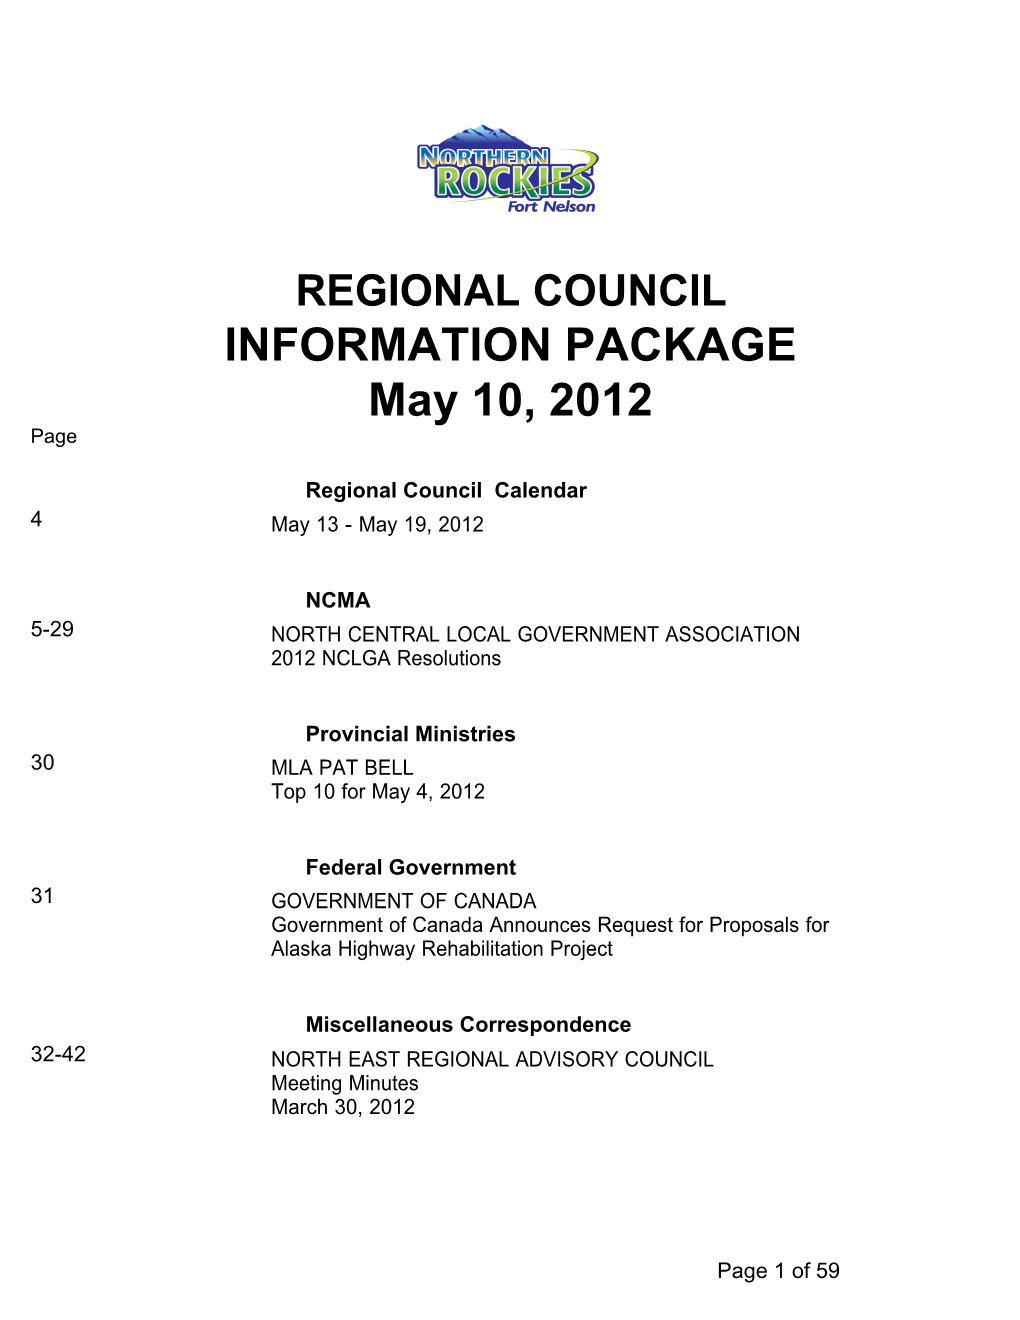 INFORMATION PACKAGE May 10, 2012